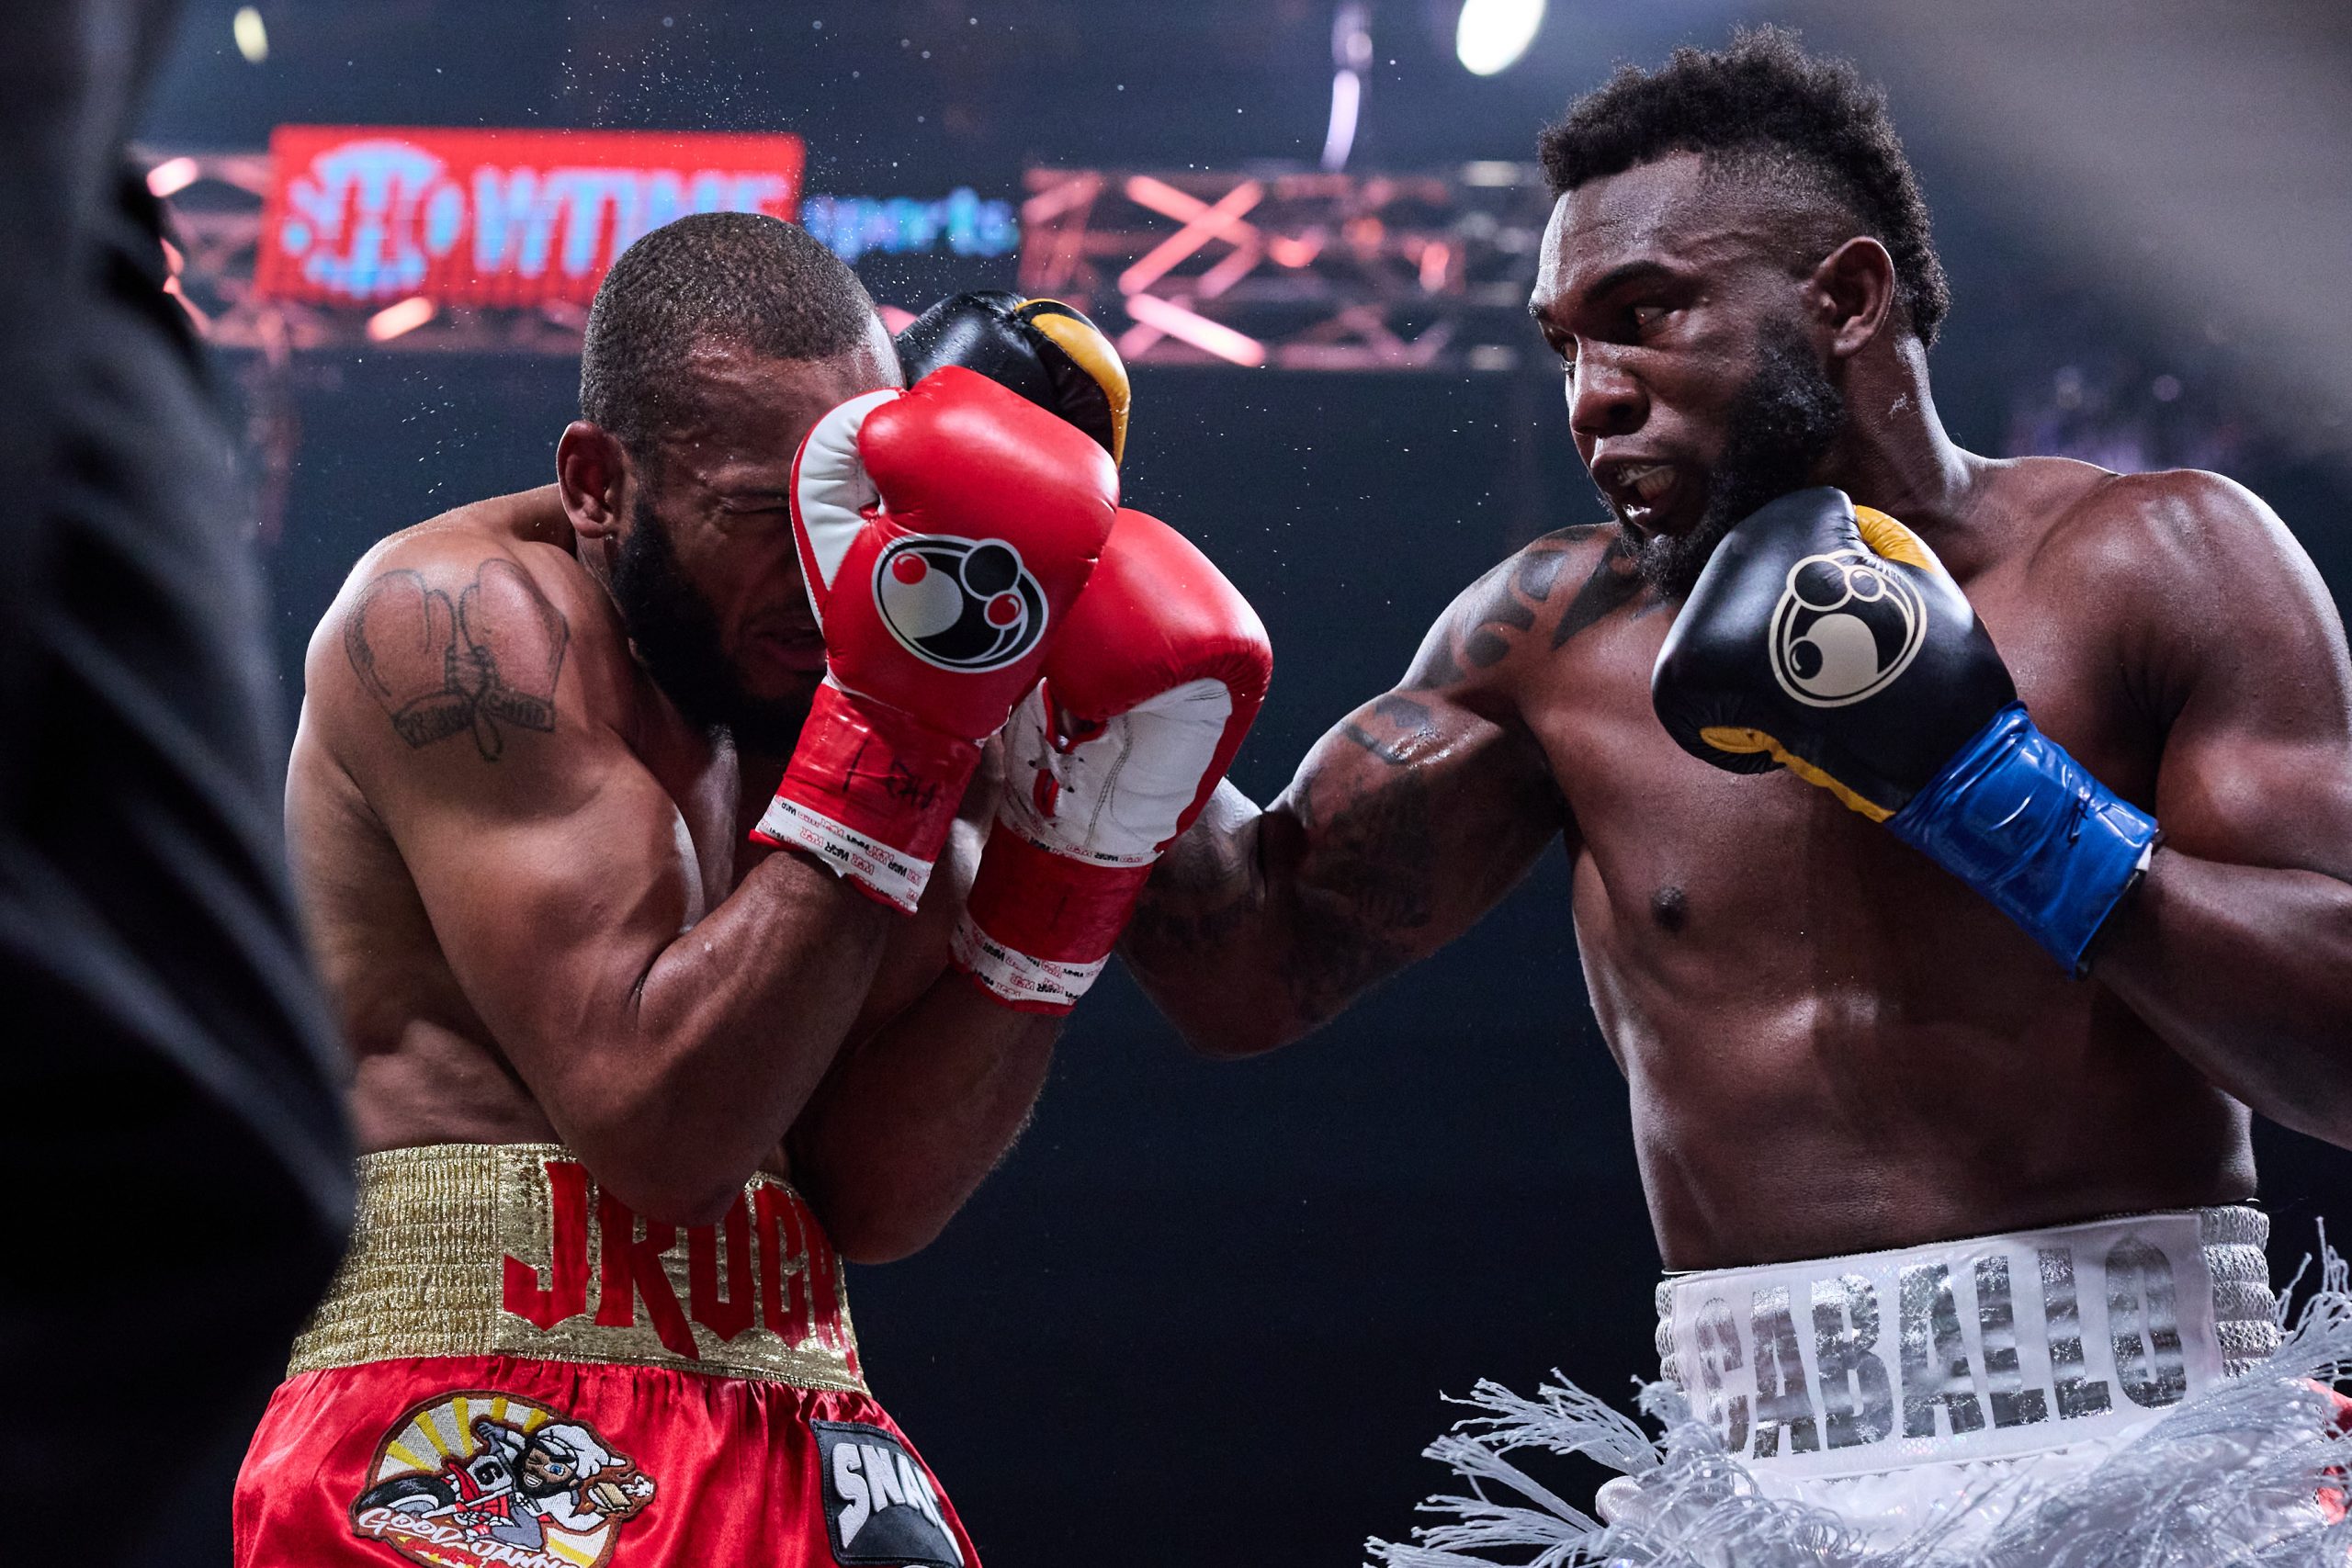 Carlos Adames stops tough Julian Williams in nine rounds, controversy ensues over stoppage